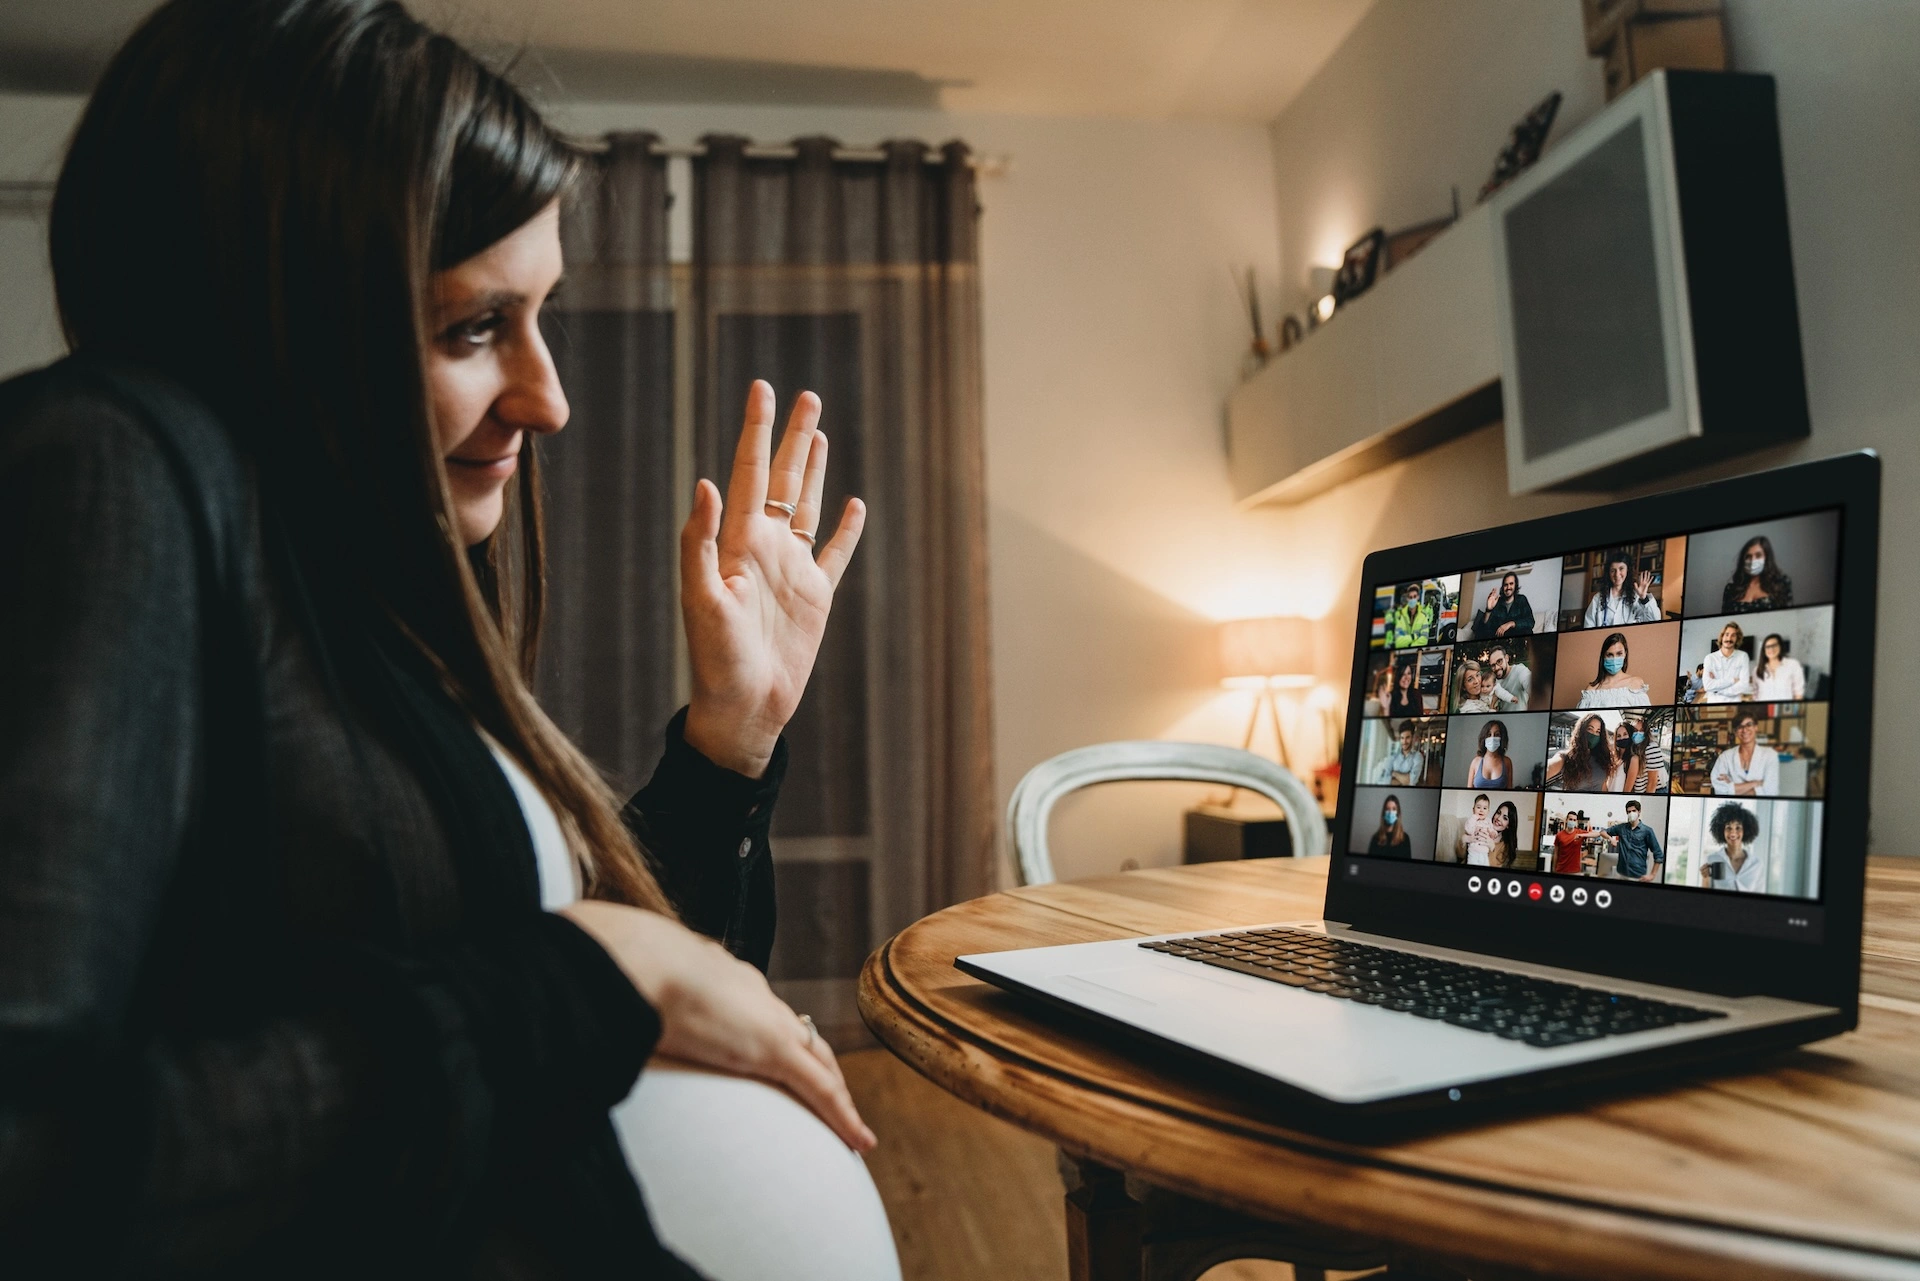 Parents benefit from virtual group prenatal care, study suggests